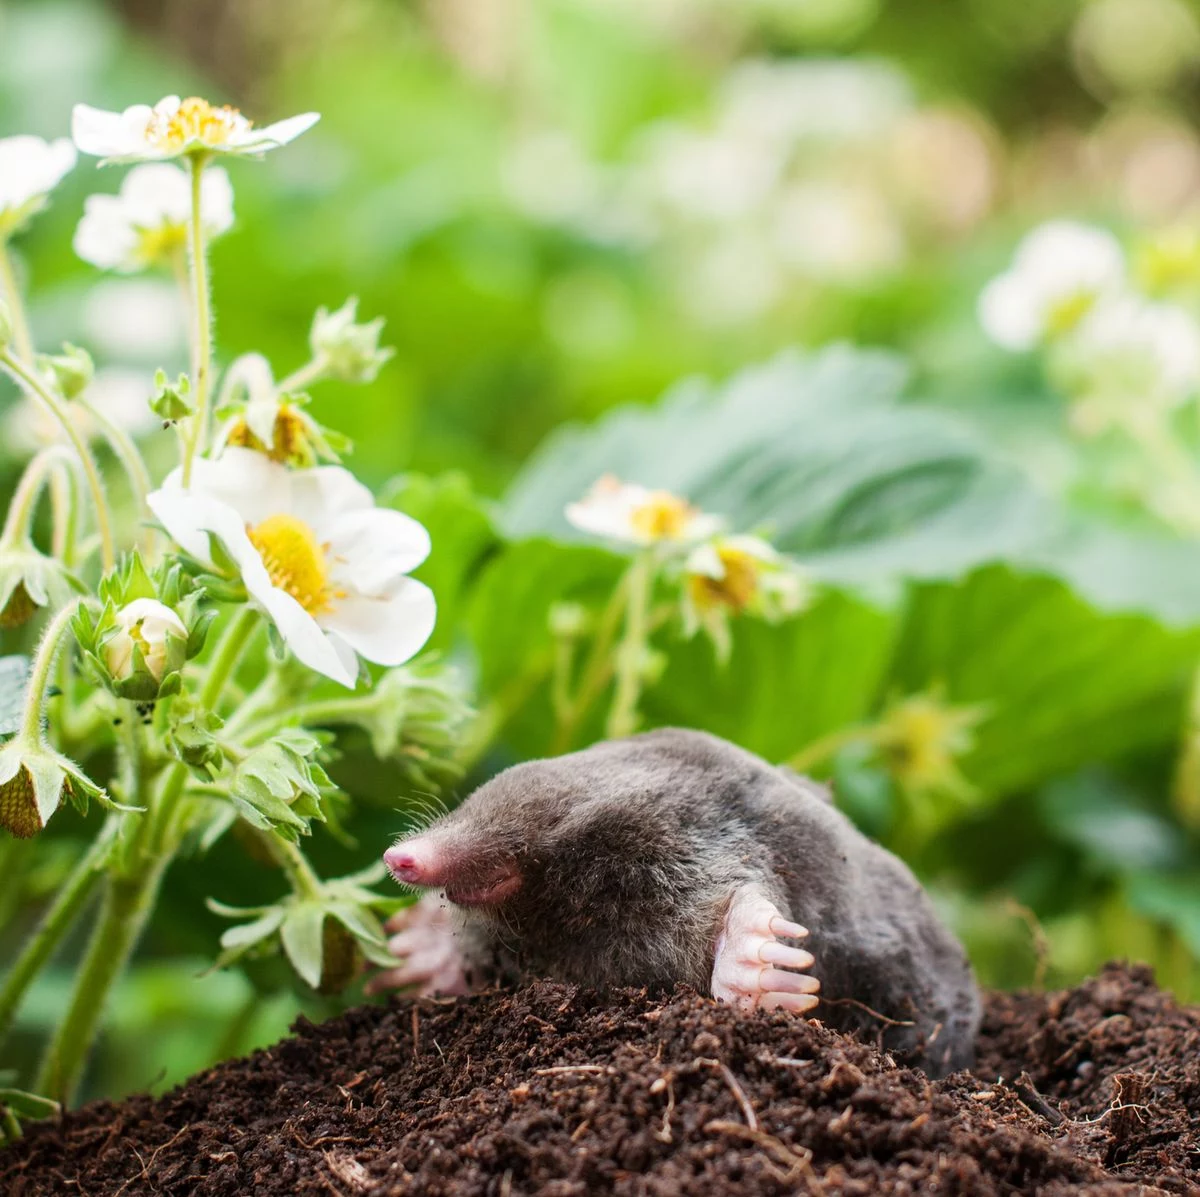 mole poking out of the ground near strawberry plant